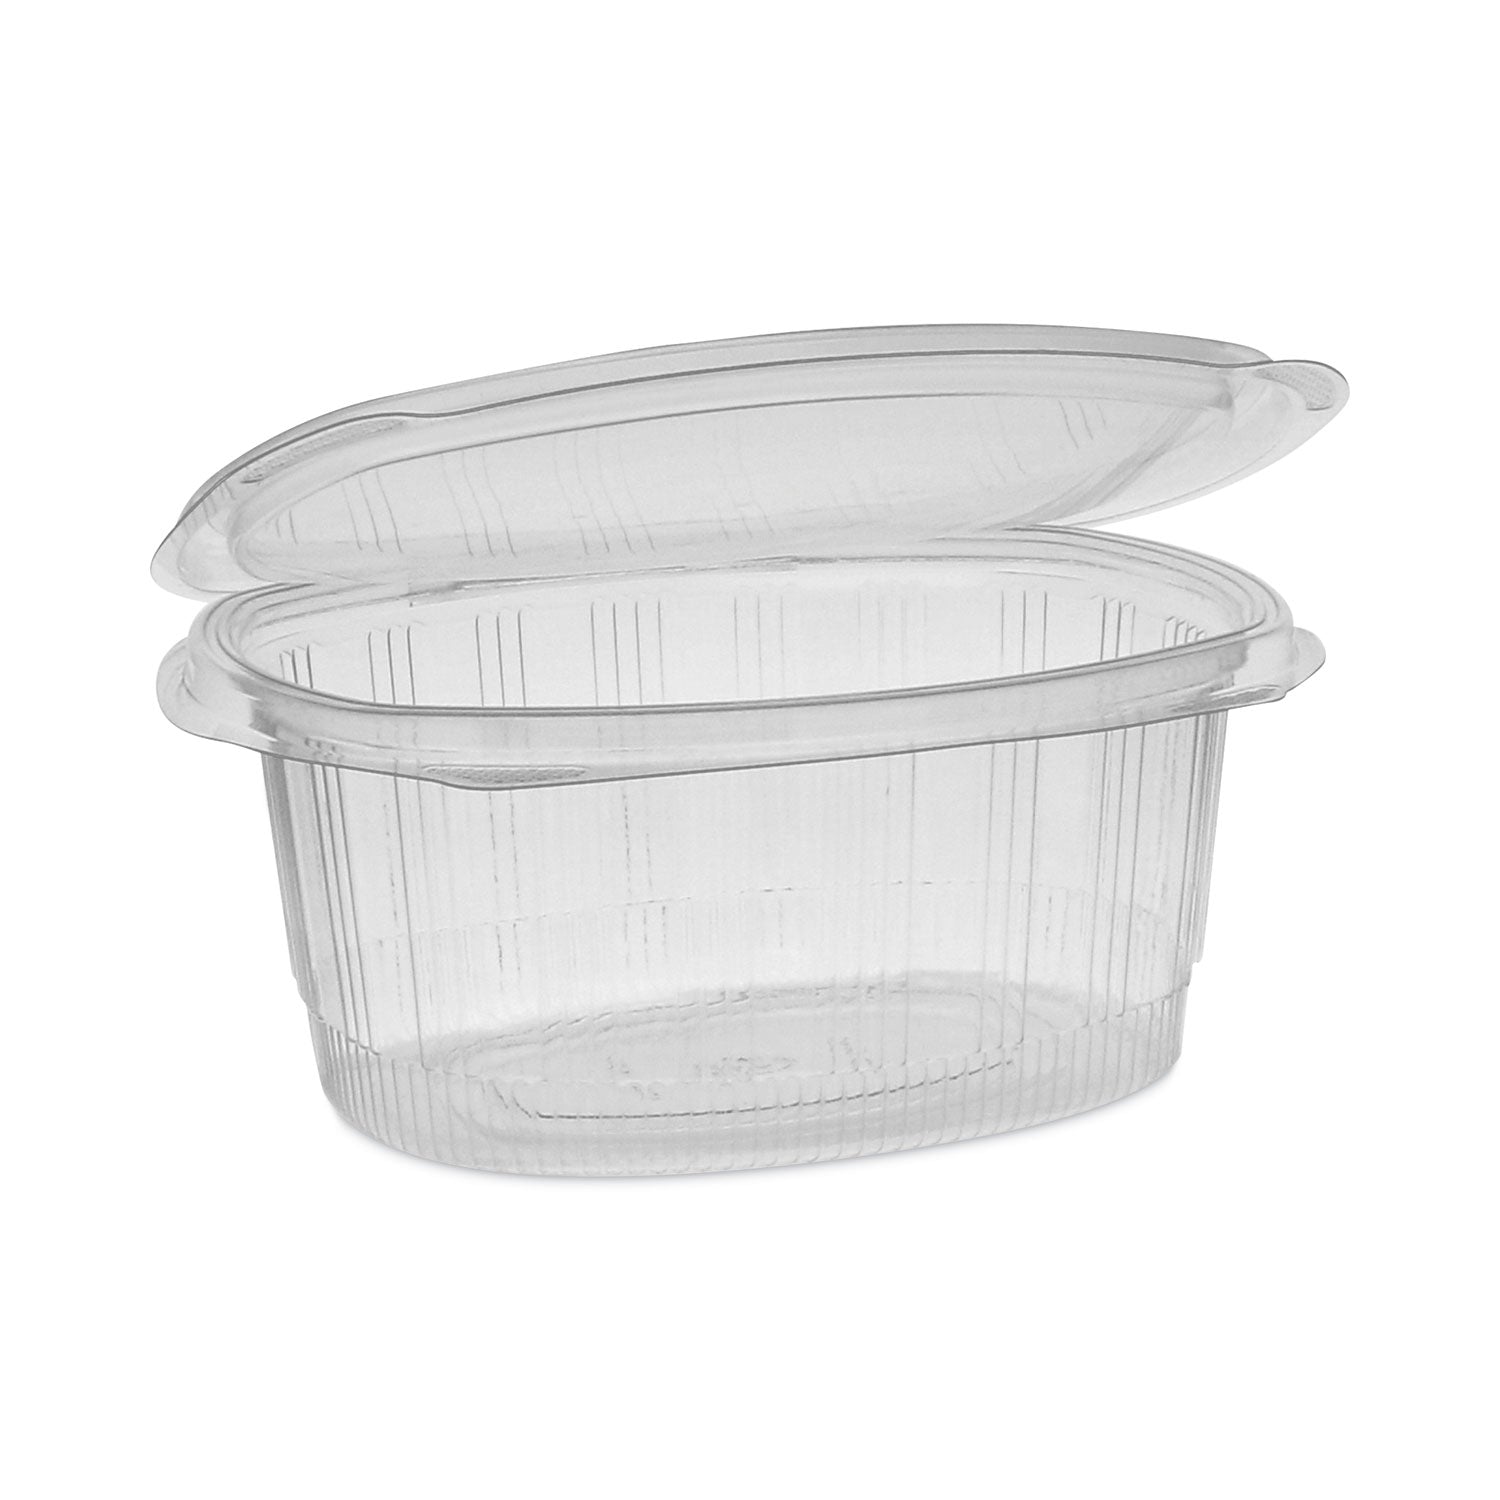 earthchoice-recycled-pet-hinged-container-32-oz-731-x-588-x-325-clear-plastic-280-carton_pctyca910320000 - 1